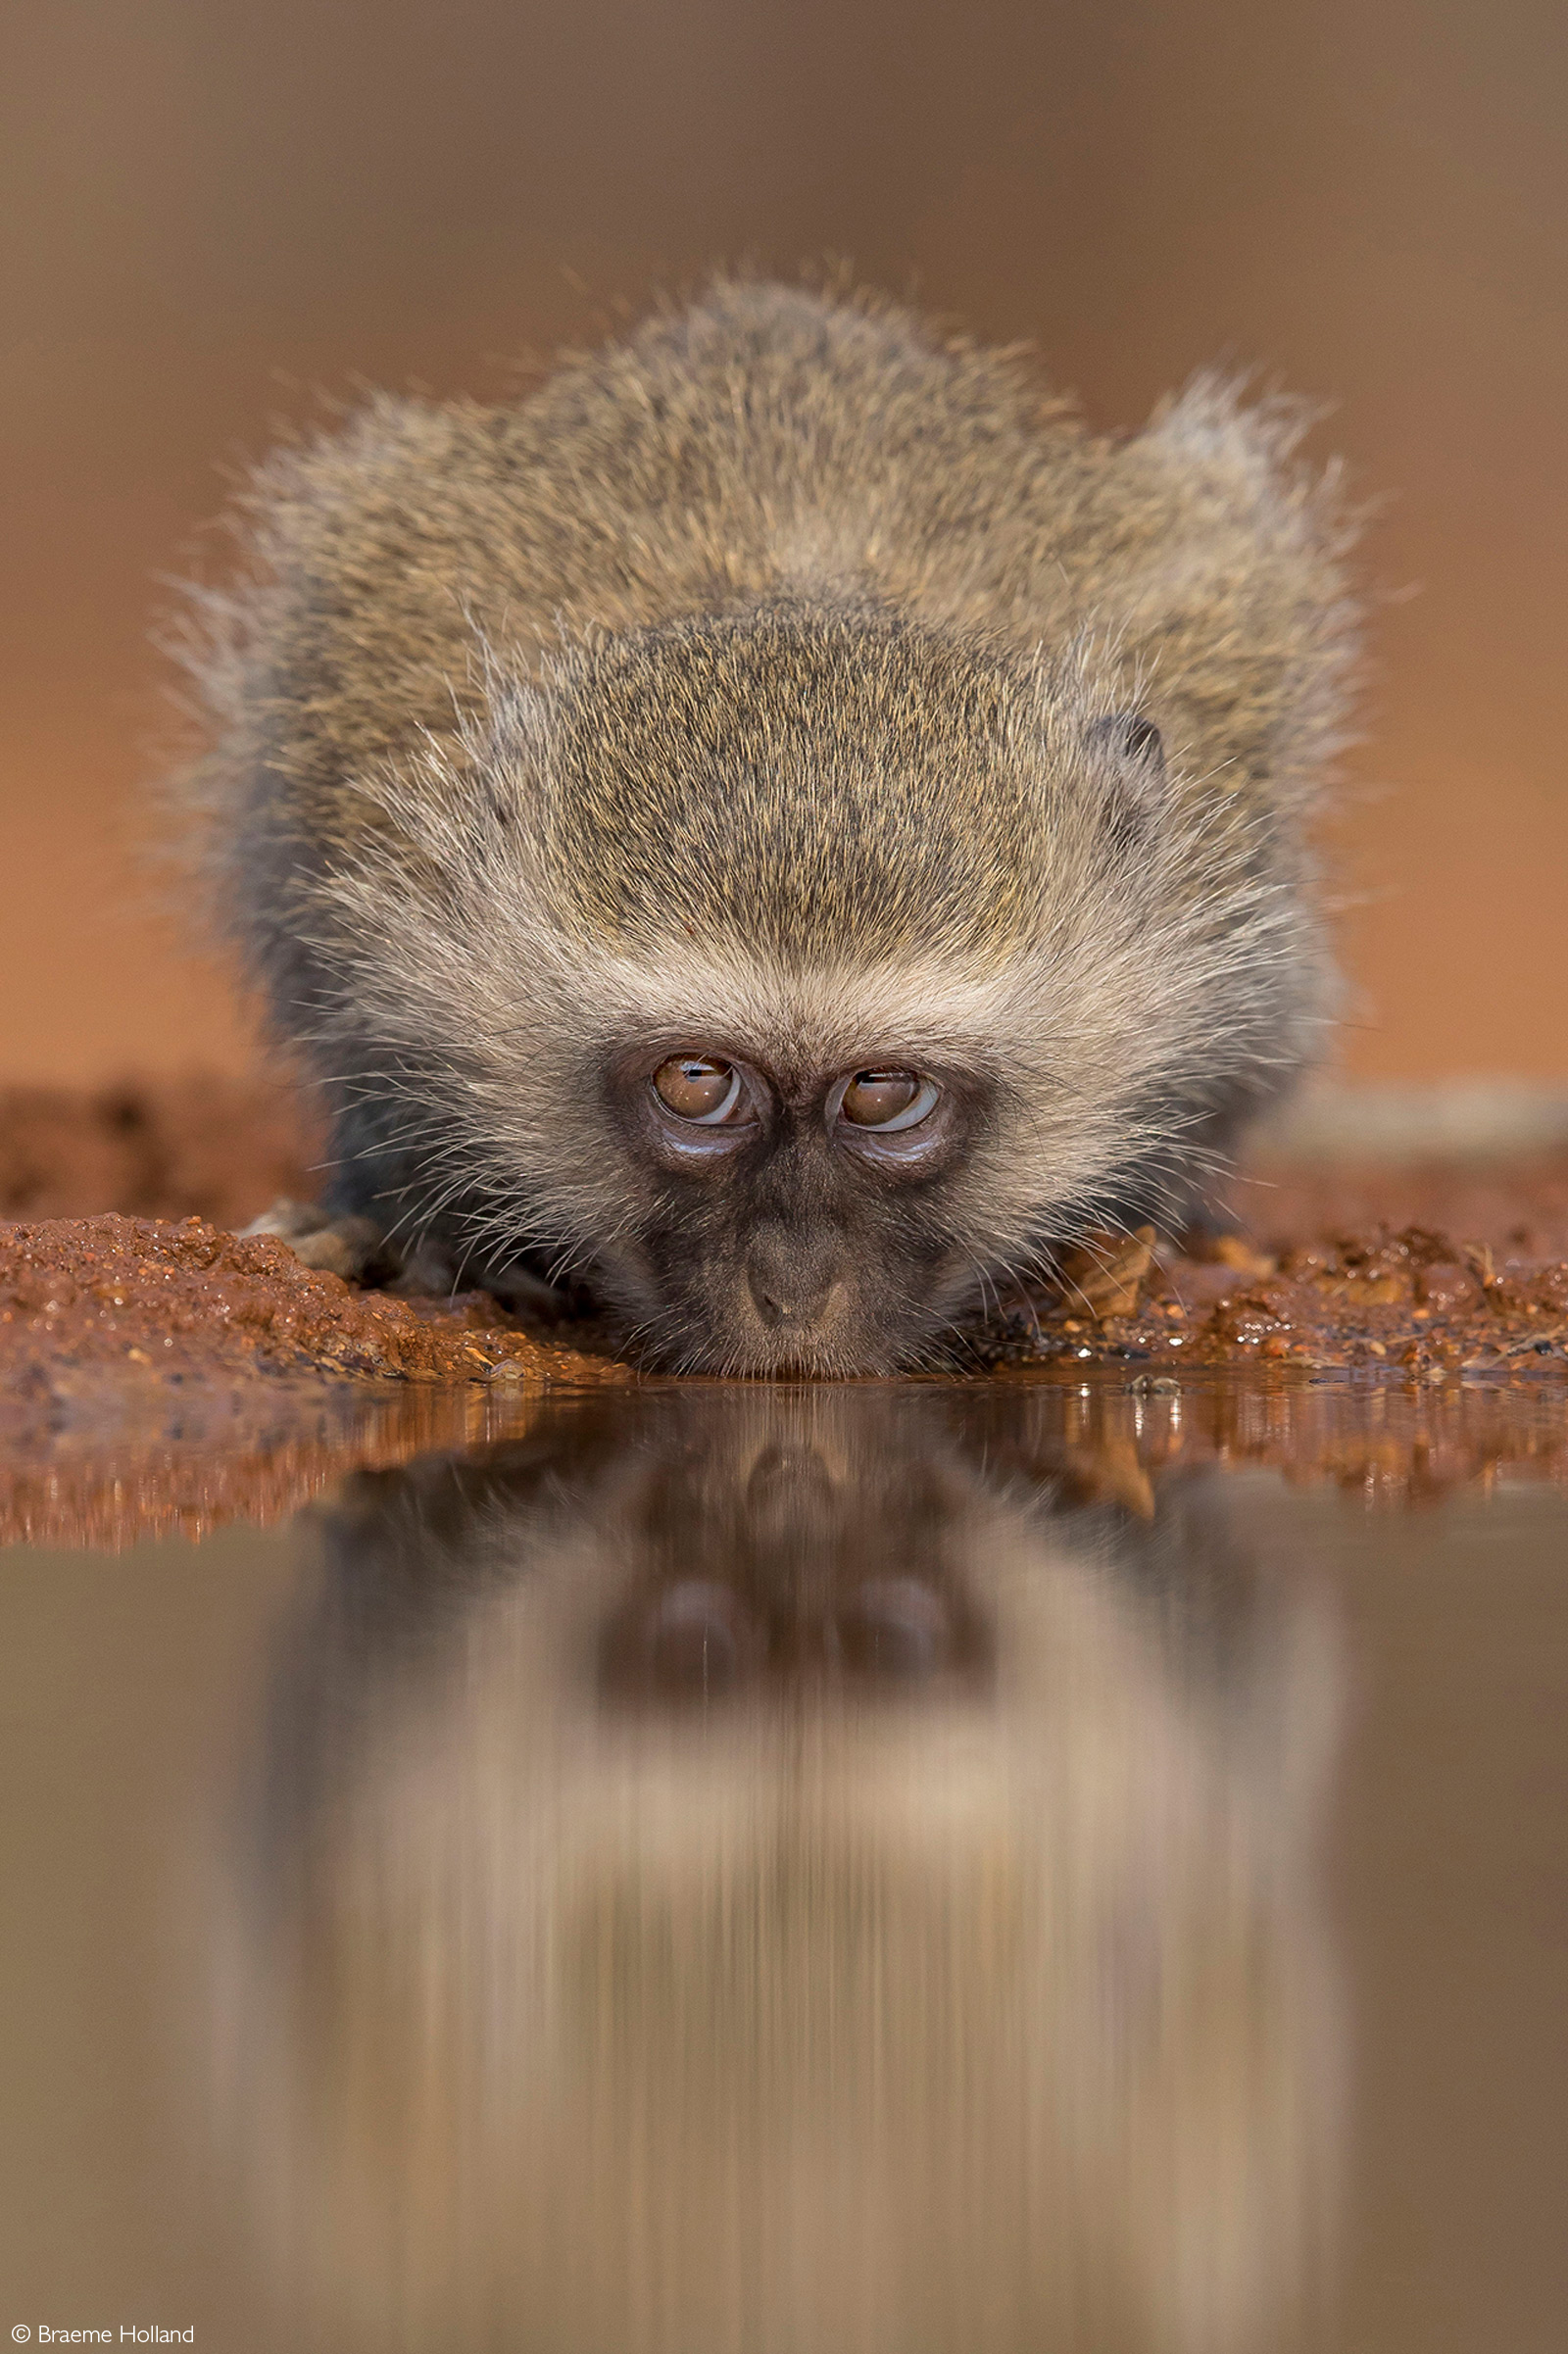 A rather mischievious-looking vervet monkey eyes out the photographer. Greater Kruger, South Africa © Braeme Holland